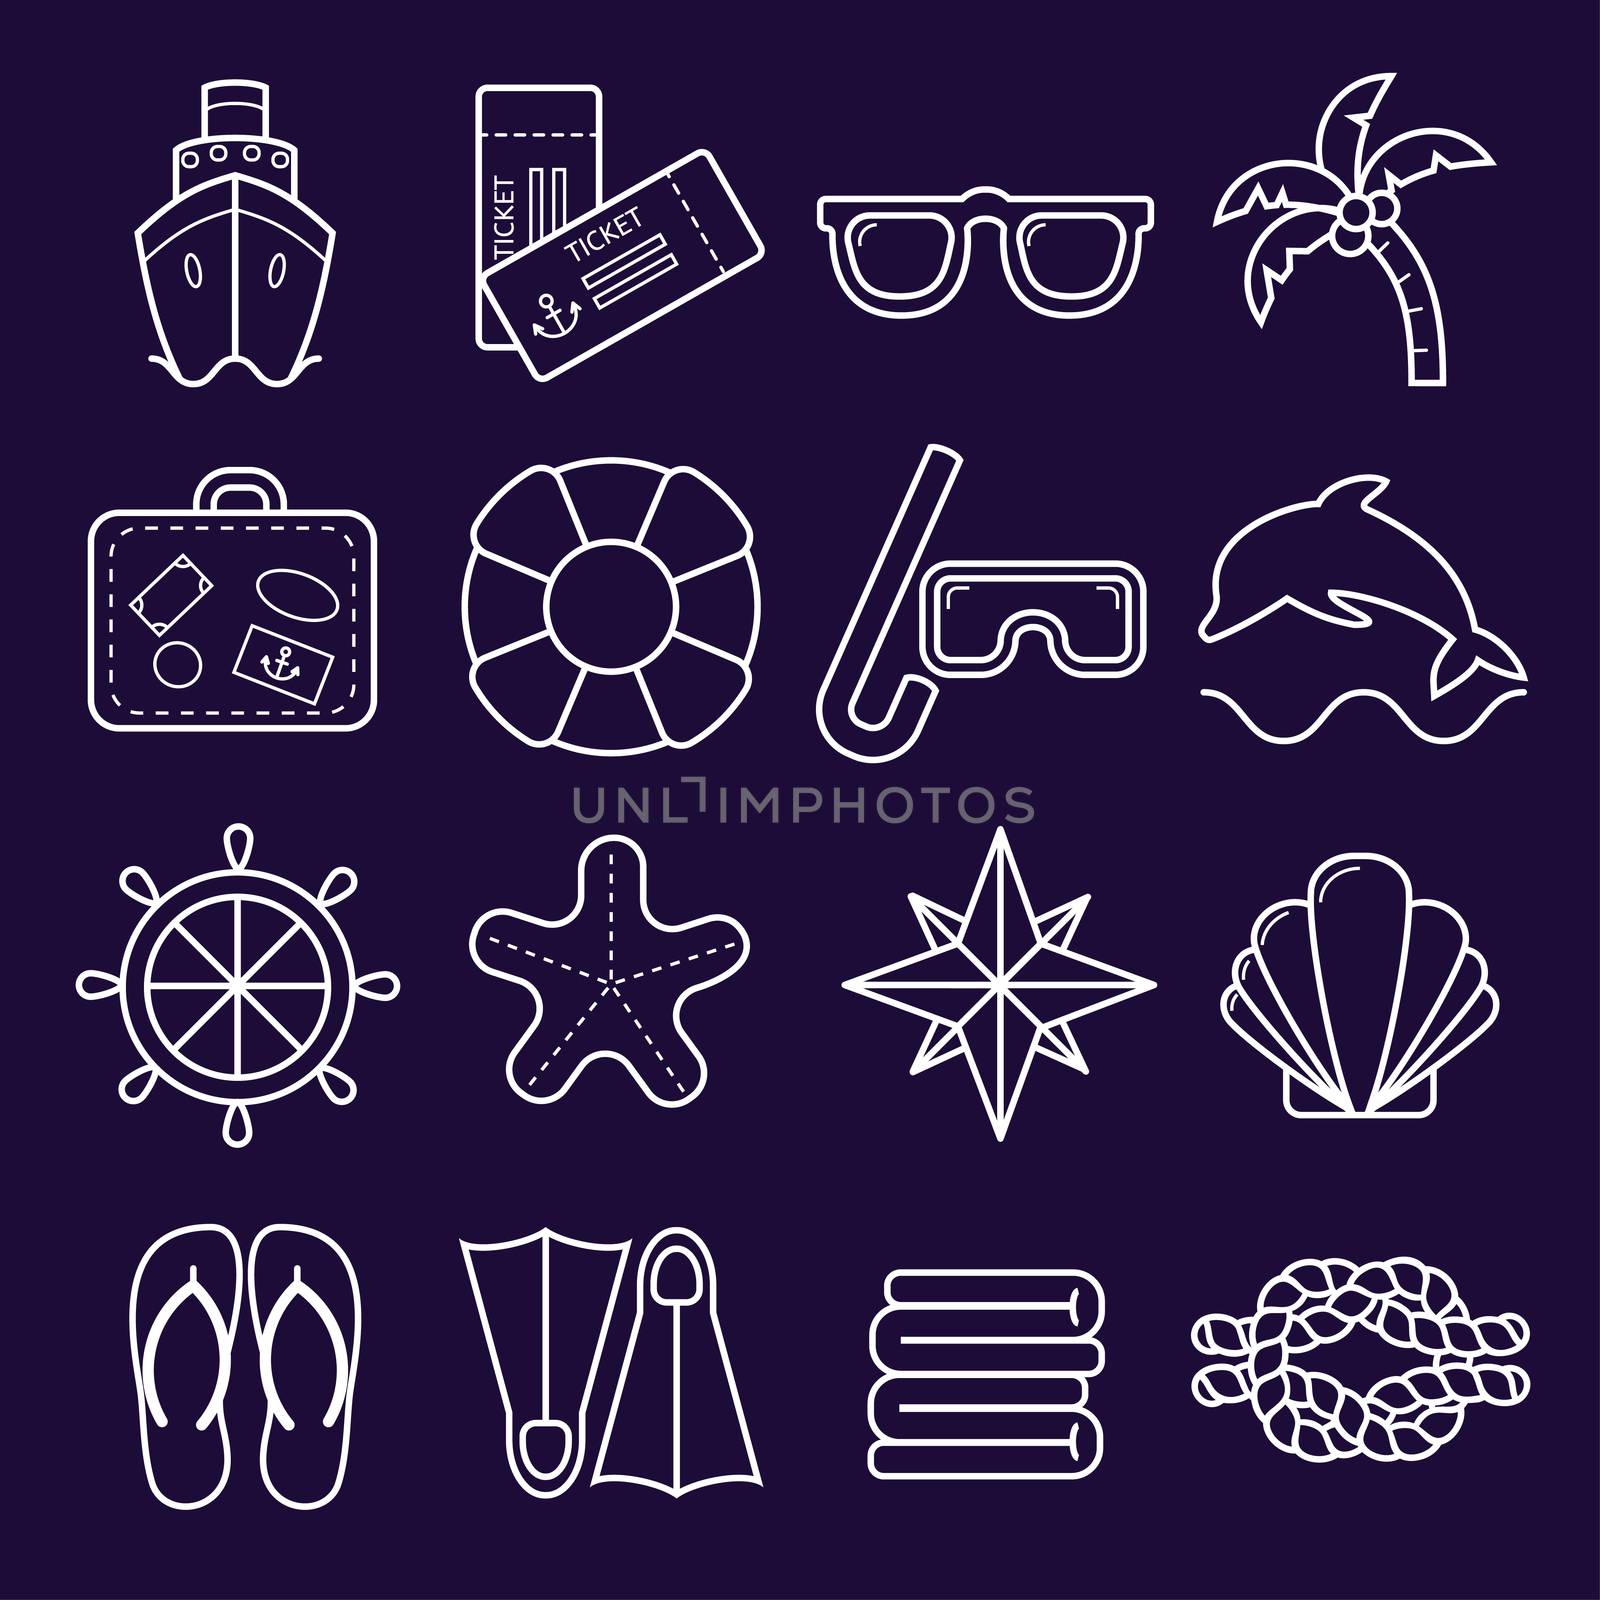 Cruise outline icons. icons isolated on dark background.